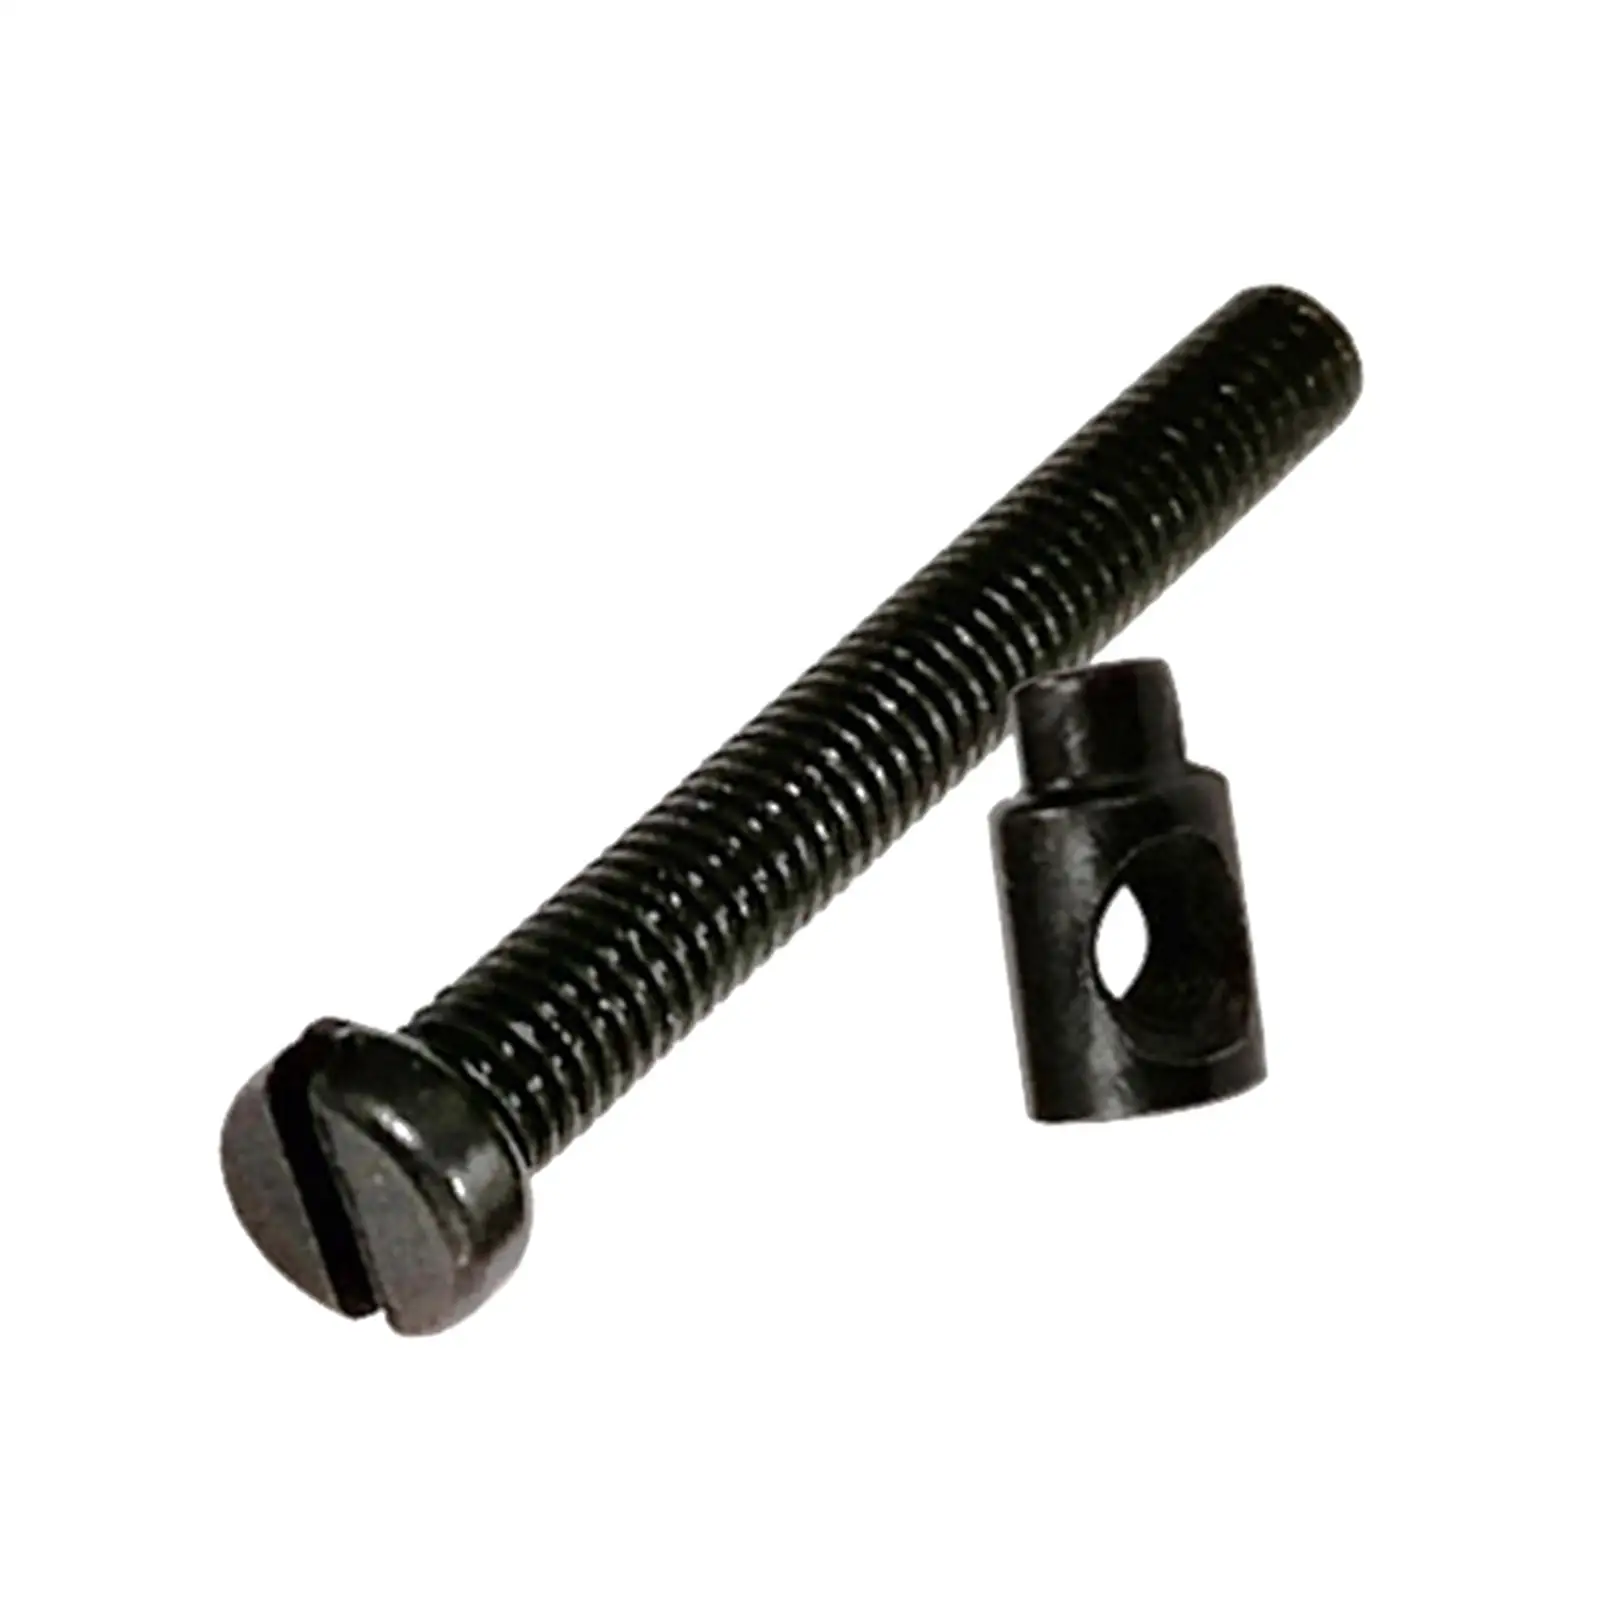 Replacement of The Chain Tensioner Screw for Chainsaws 405 5016,